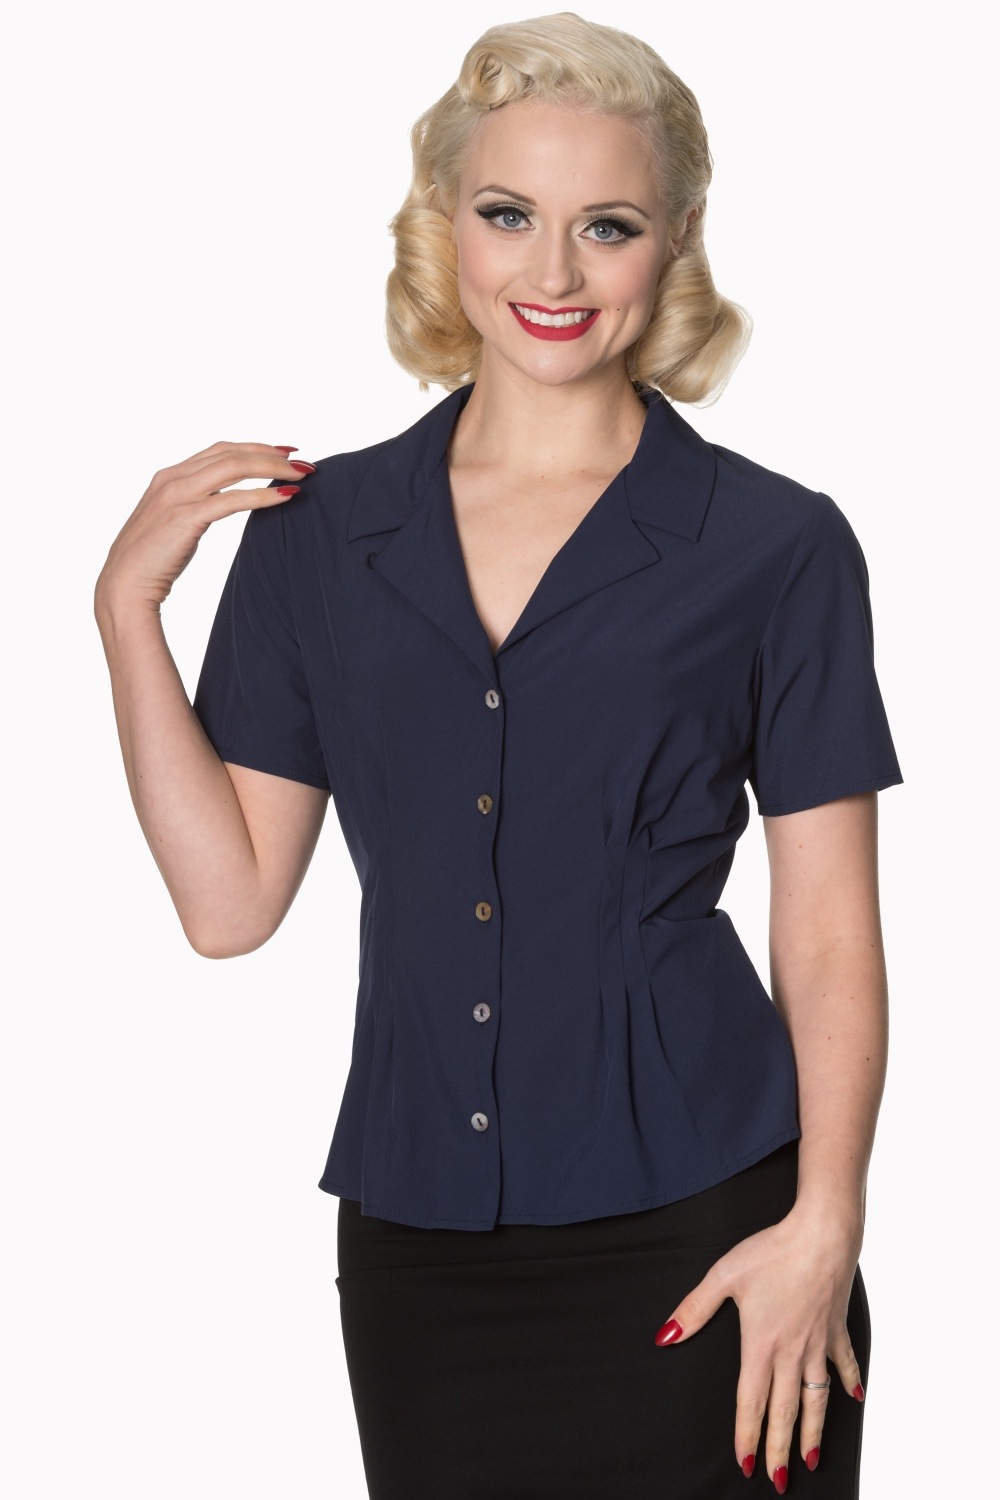 BNBL1274NBL_chemisier-blouse-pin-up-retro-50-s-rockabilly-classic-glamour